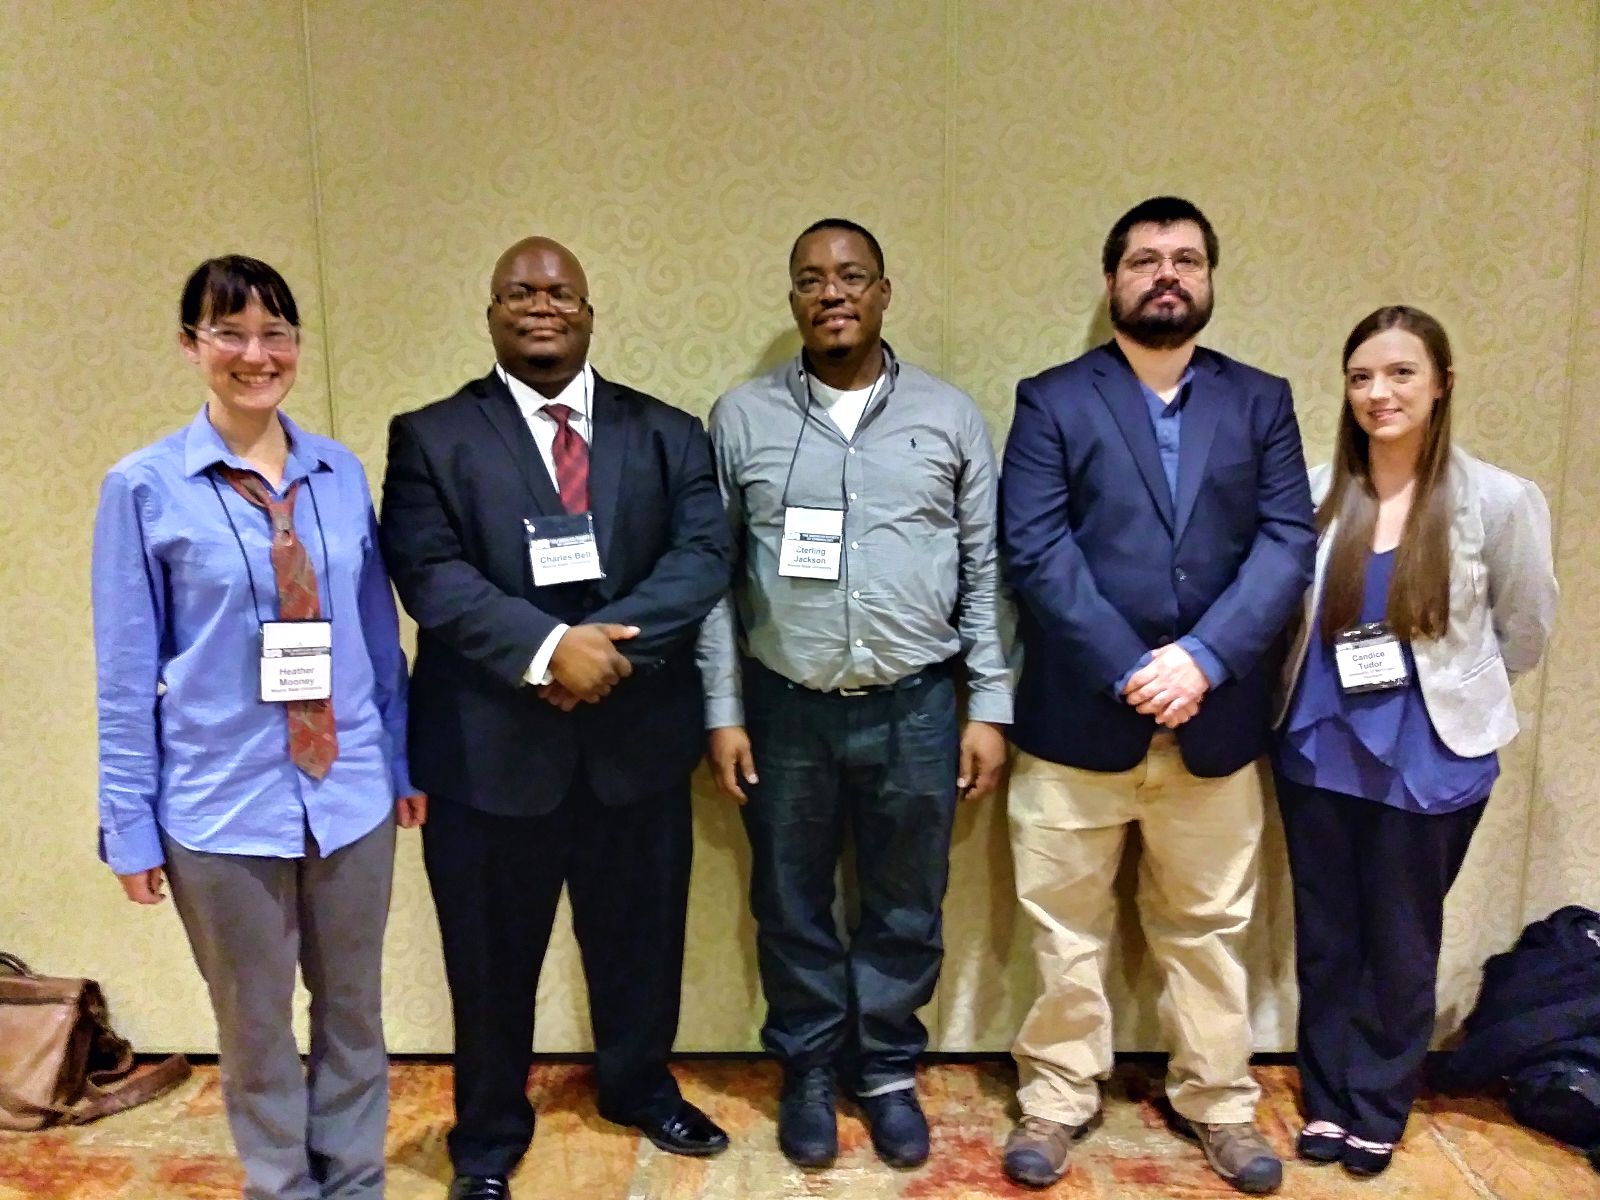 Panel members (from left) Heather Mooney, Charles Bell, Sterling Jackson, Aaron Kinzel, and Candice Tudor